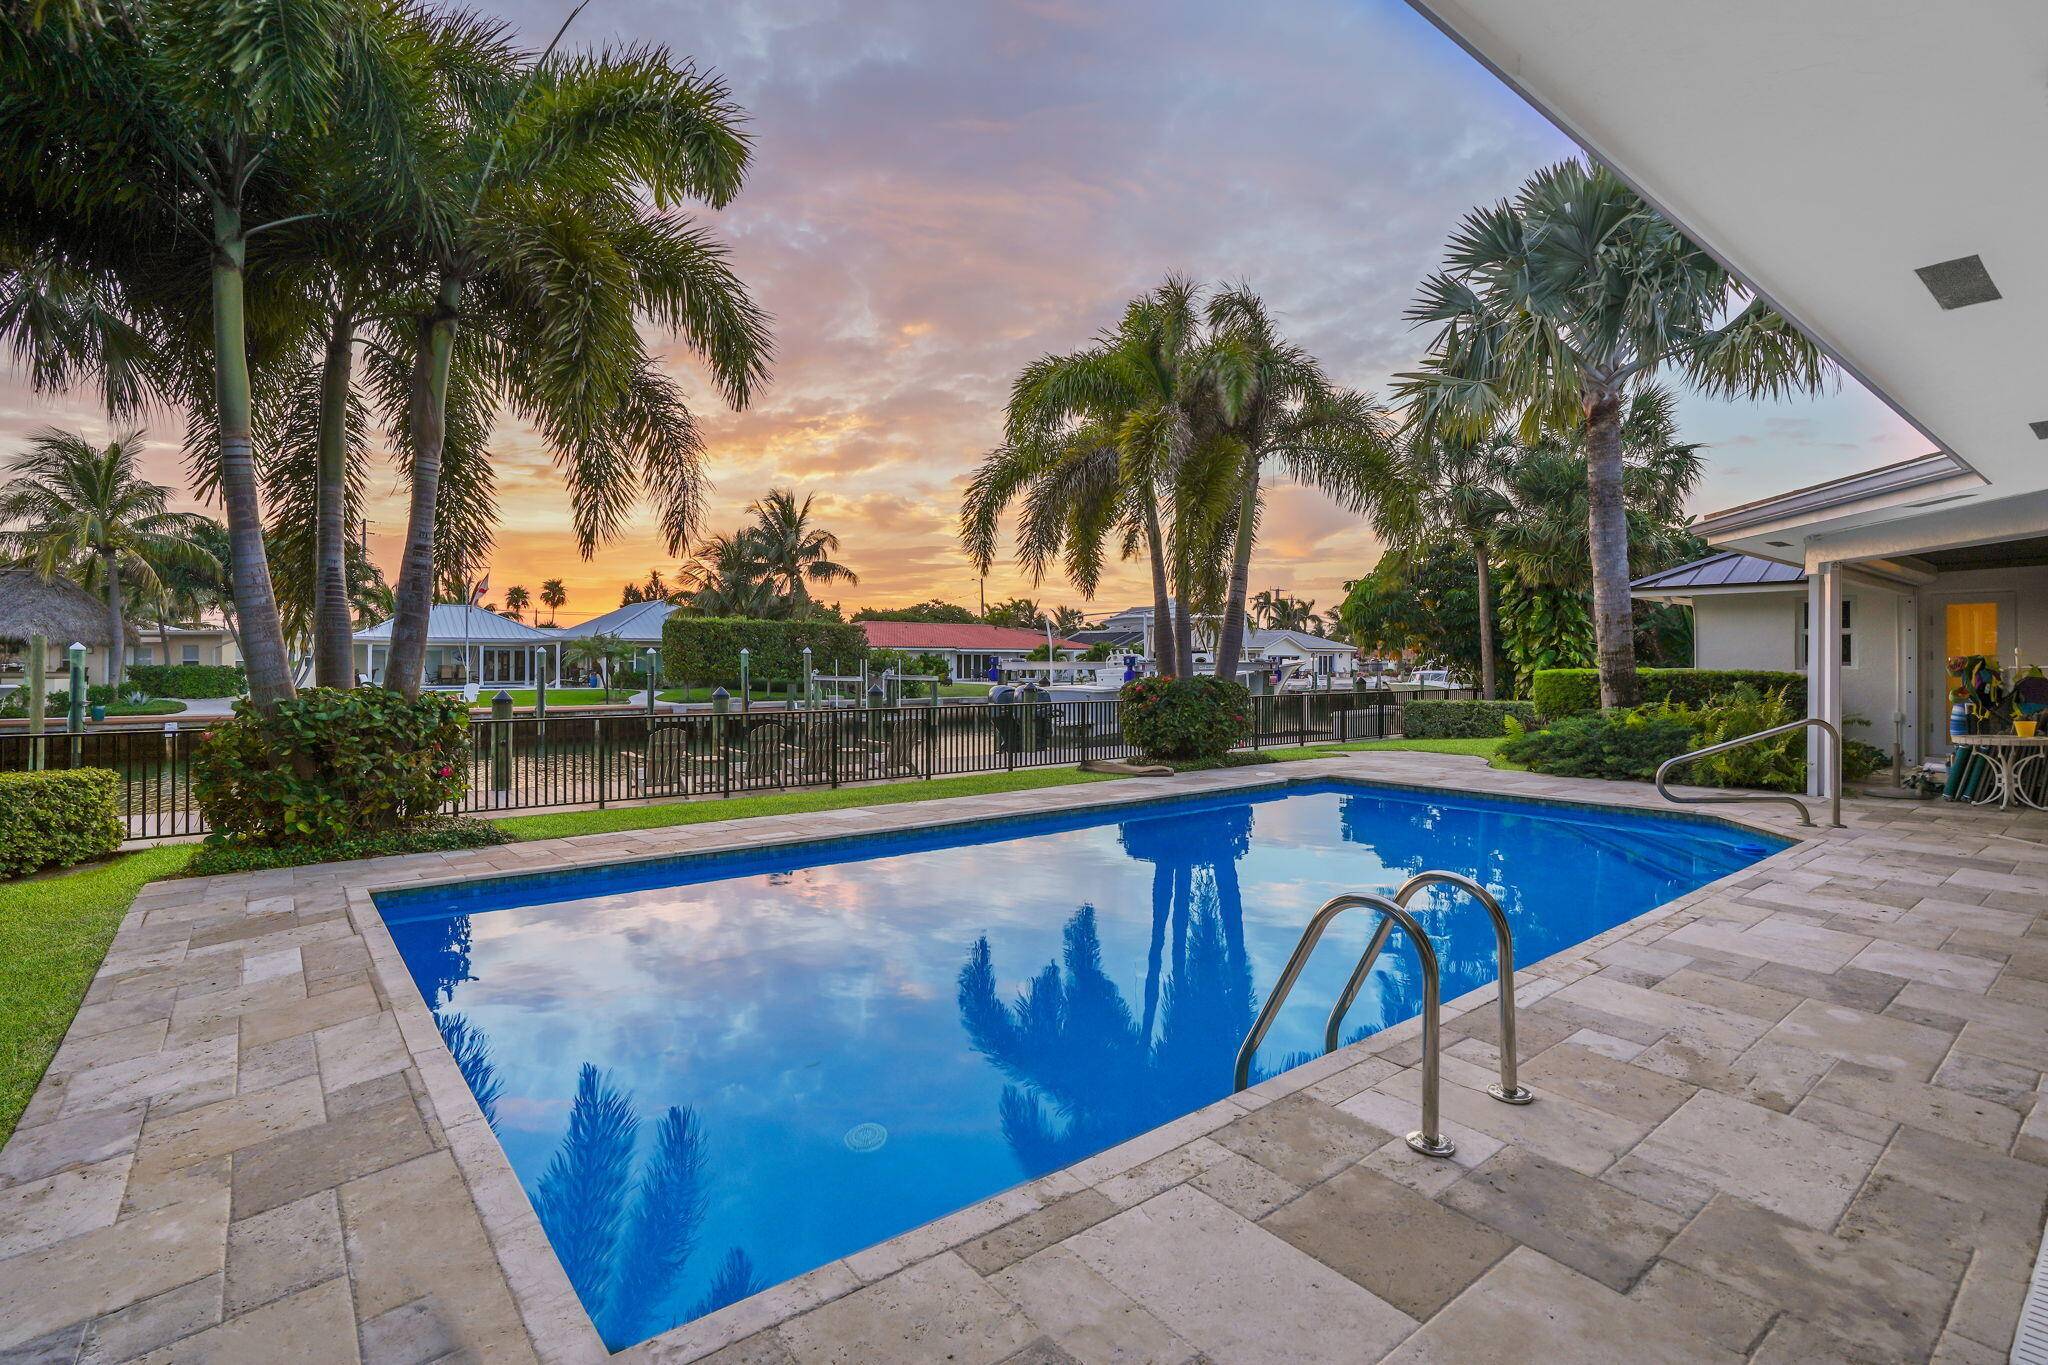 Introducing 3855 N Ocean Drive a luxurious and stunning single family home located on the water.